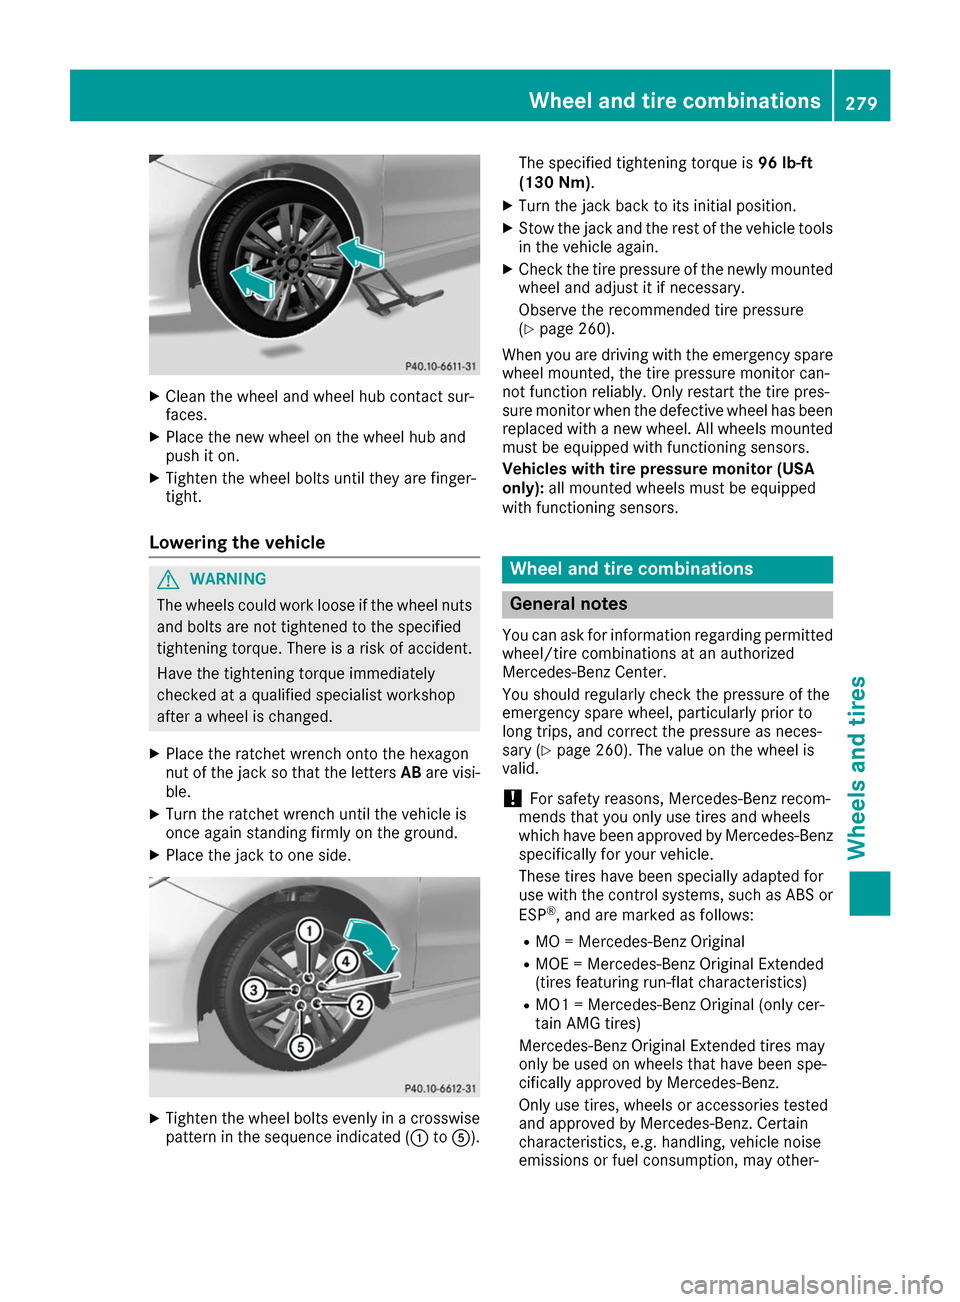 MERCEDES-BENZ B-Class 2017 W246 Owners Guide X
Clean the wheel and wheel hub contact sur-
faces.
X Place the new wheel on the wheel hub and
push it on.
X Tighten the wheel bolts until they are finger-
tight.
Lowering the vehicle G
WARNING
The wh